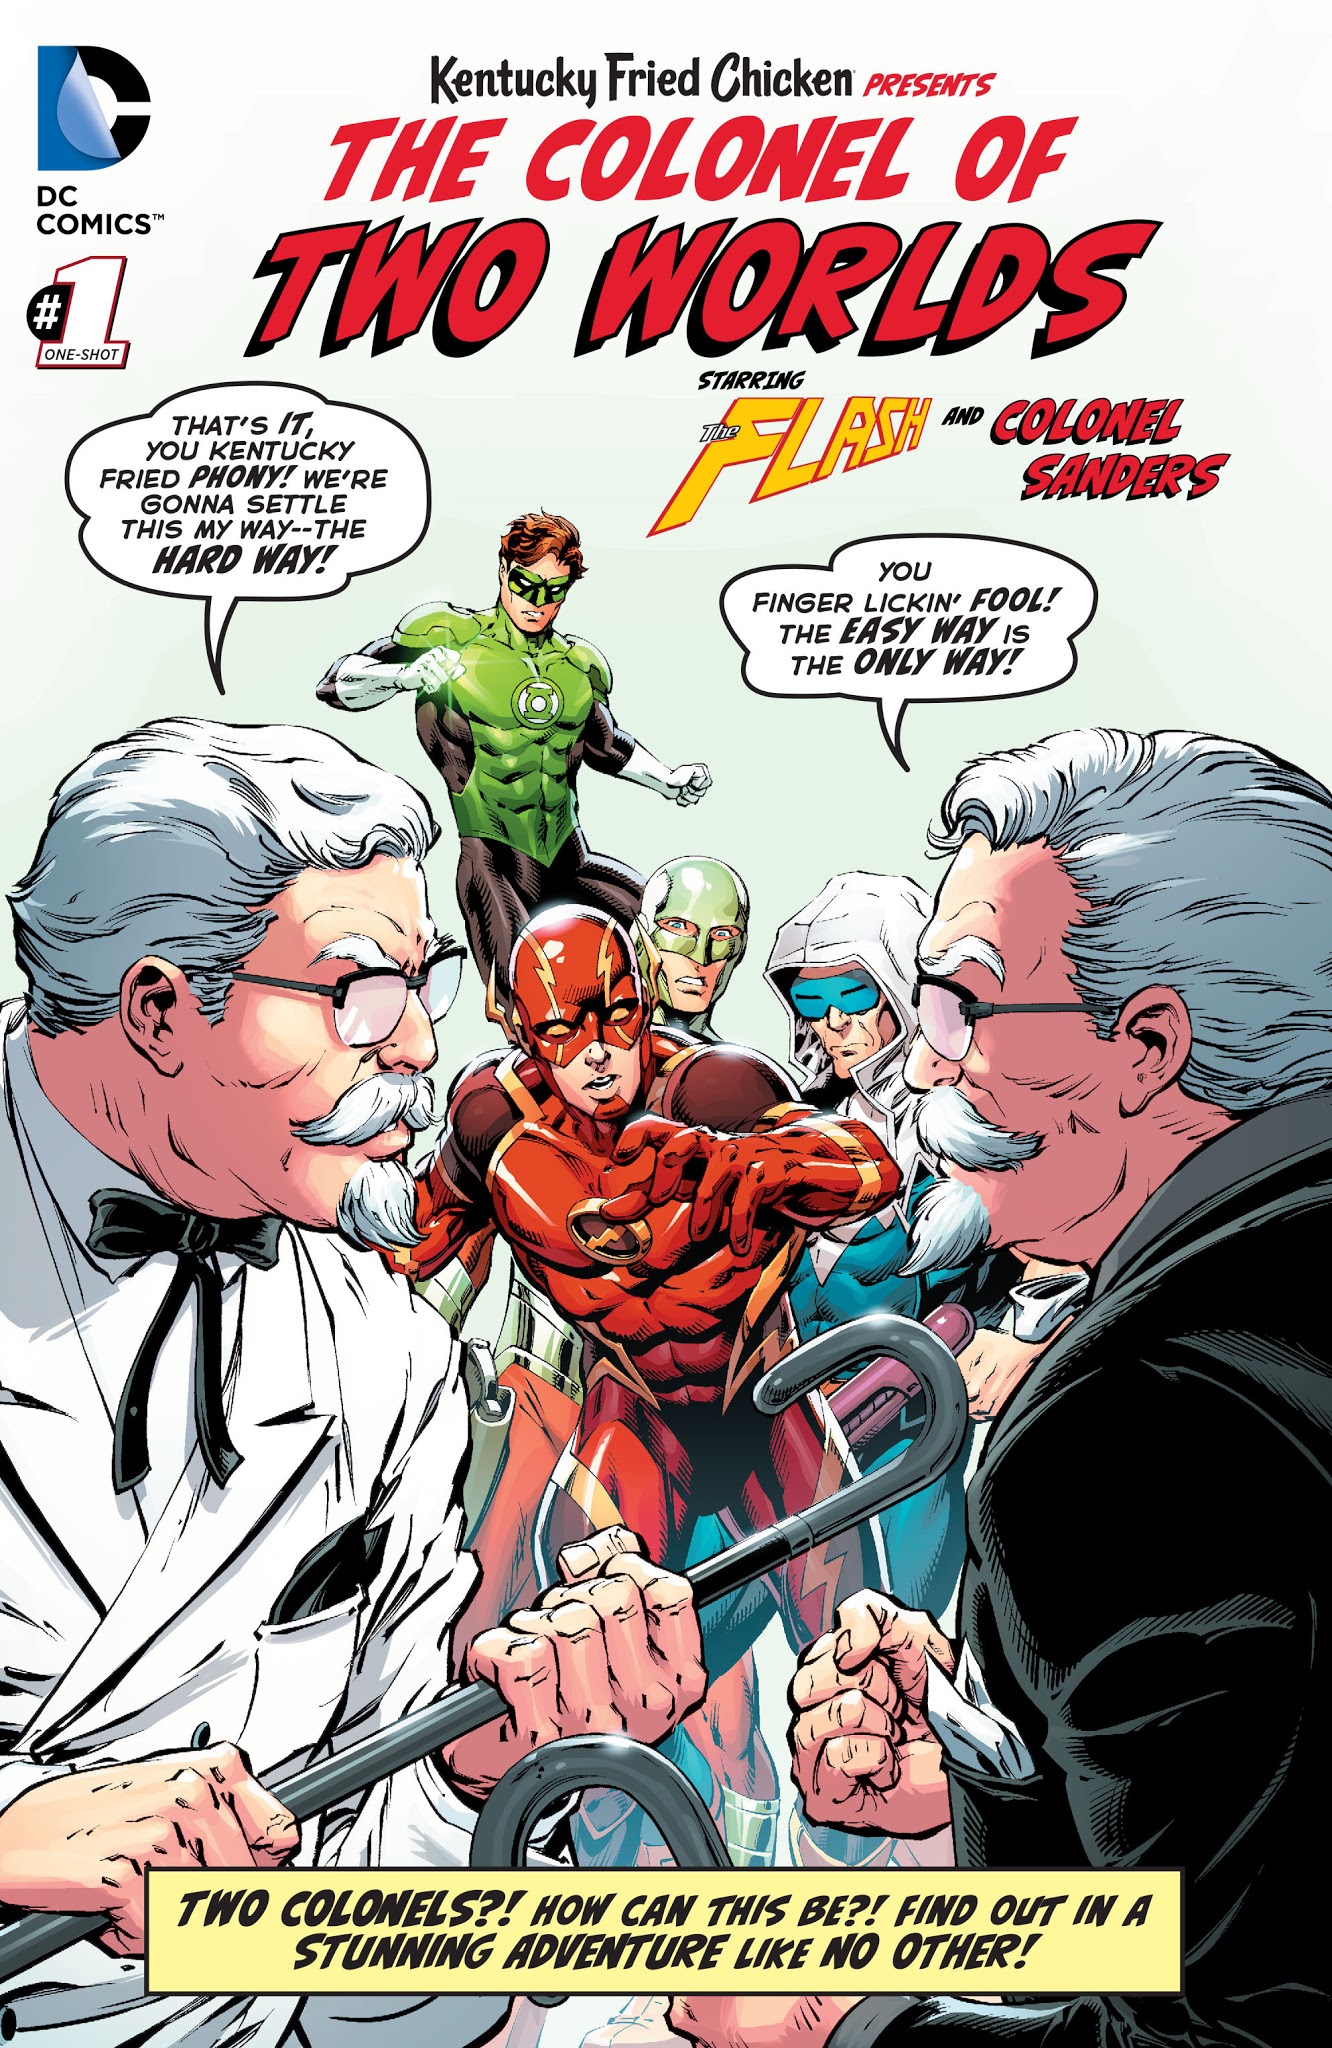 Read online KFC: The Colonel of Two Worlds comic -  Issue # Full - 1